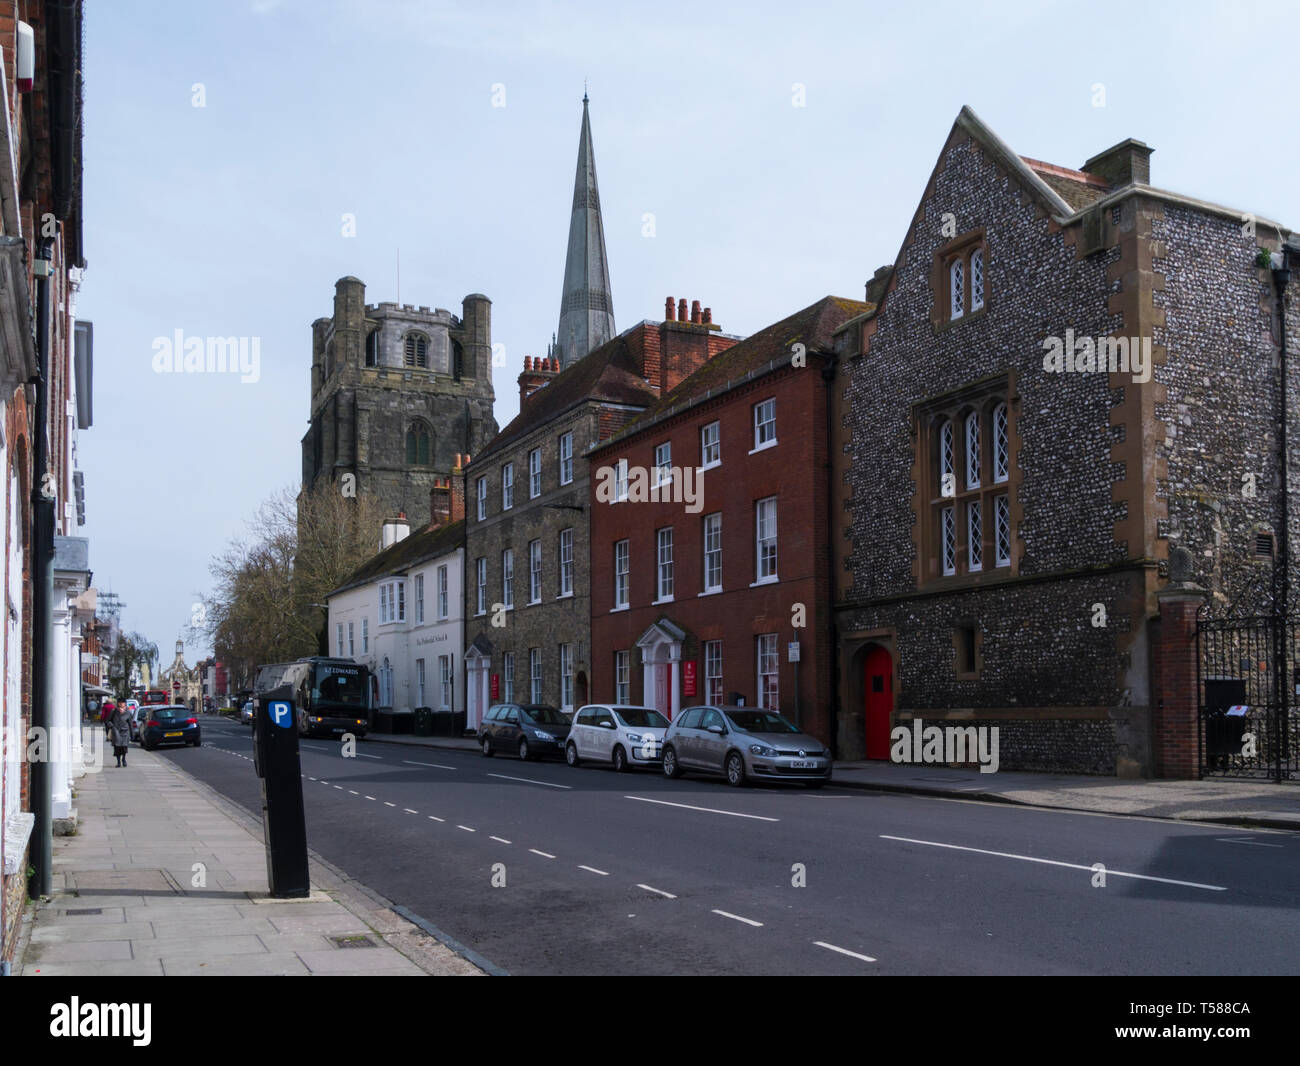 Prebendal School   independent preparatory school buildings Chichester West Sussex UK with the landmark spire of Chichester Cathedral in background Stock Photo